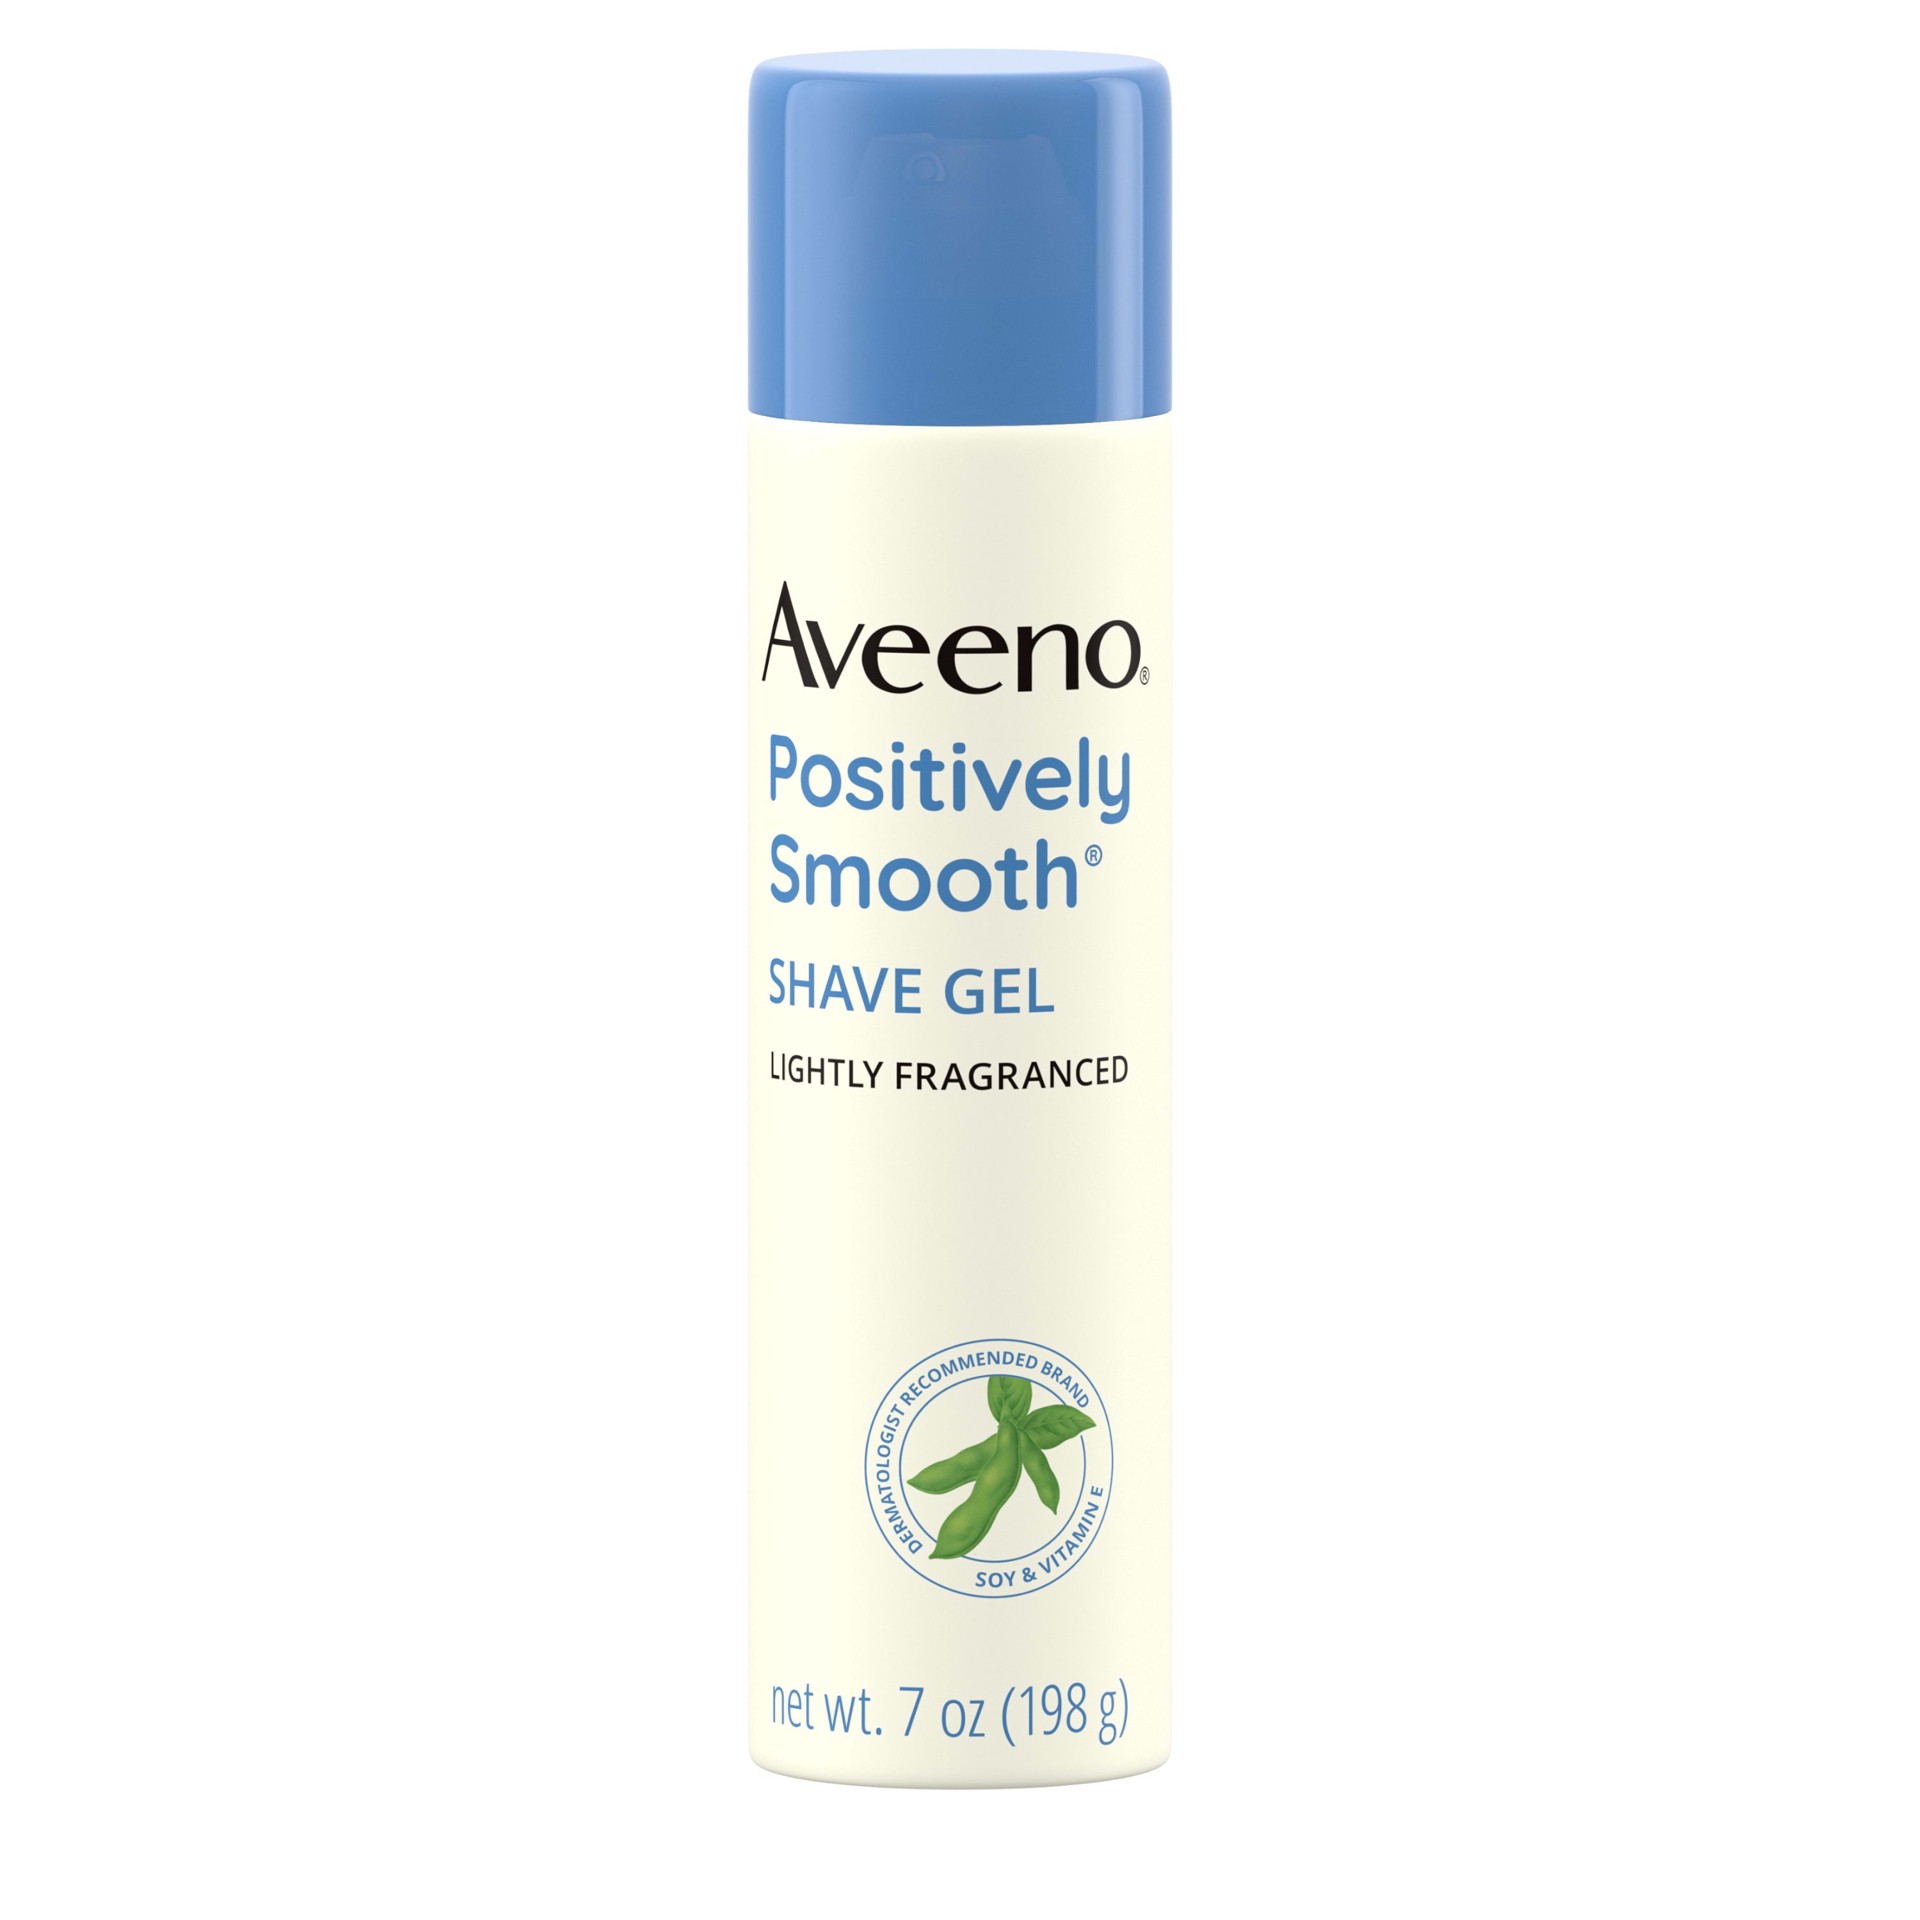 slide 1 of 7, Aveeno Positively Smooth Moisturizing Shave Gel with Soy, Aloe & Vitamin E helps Prevent Nicks, Cuts & Razor Bumps, Creamy Shave Gel for a Close, Smooth Shave, Lightly Fragranced, 7 oz, 7 oz